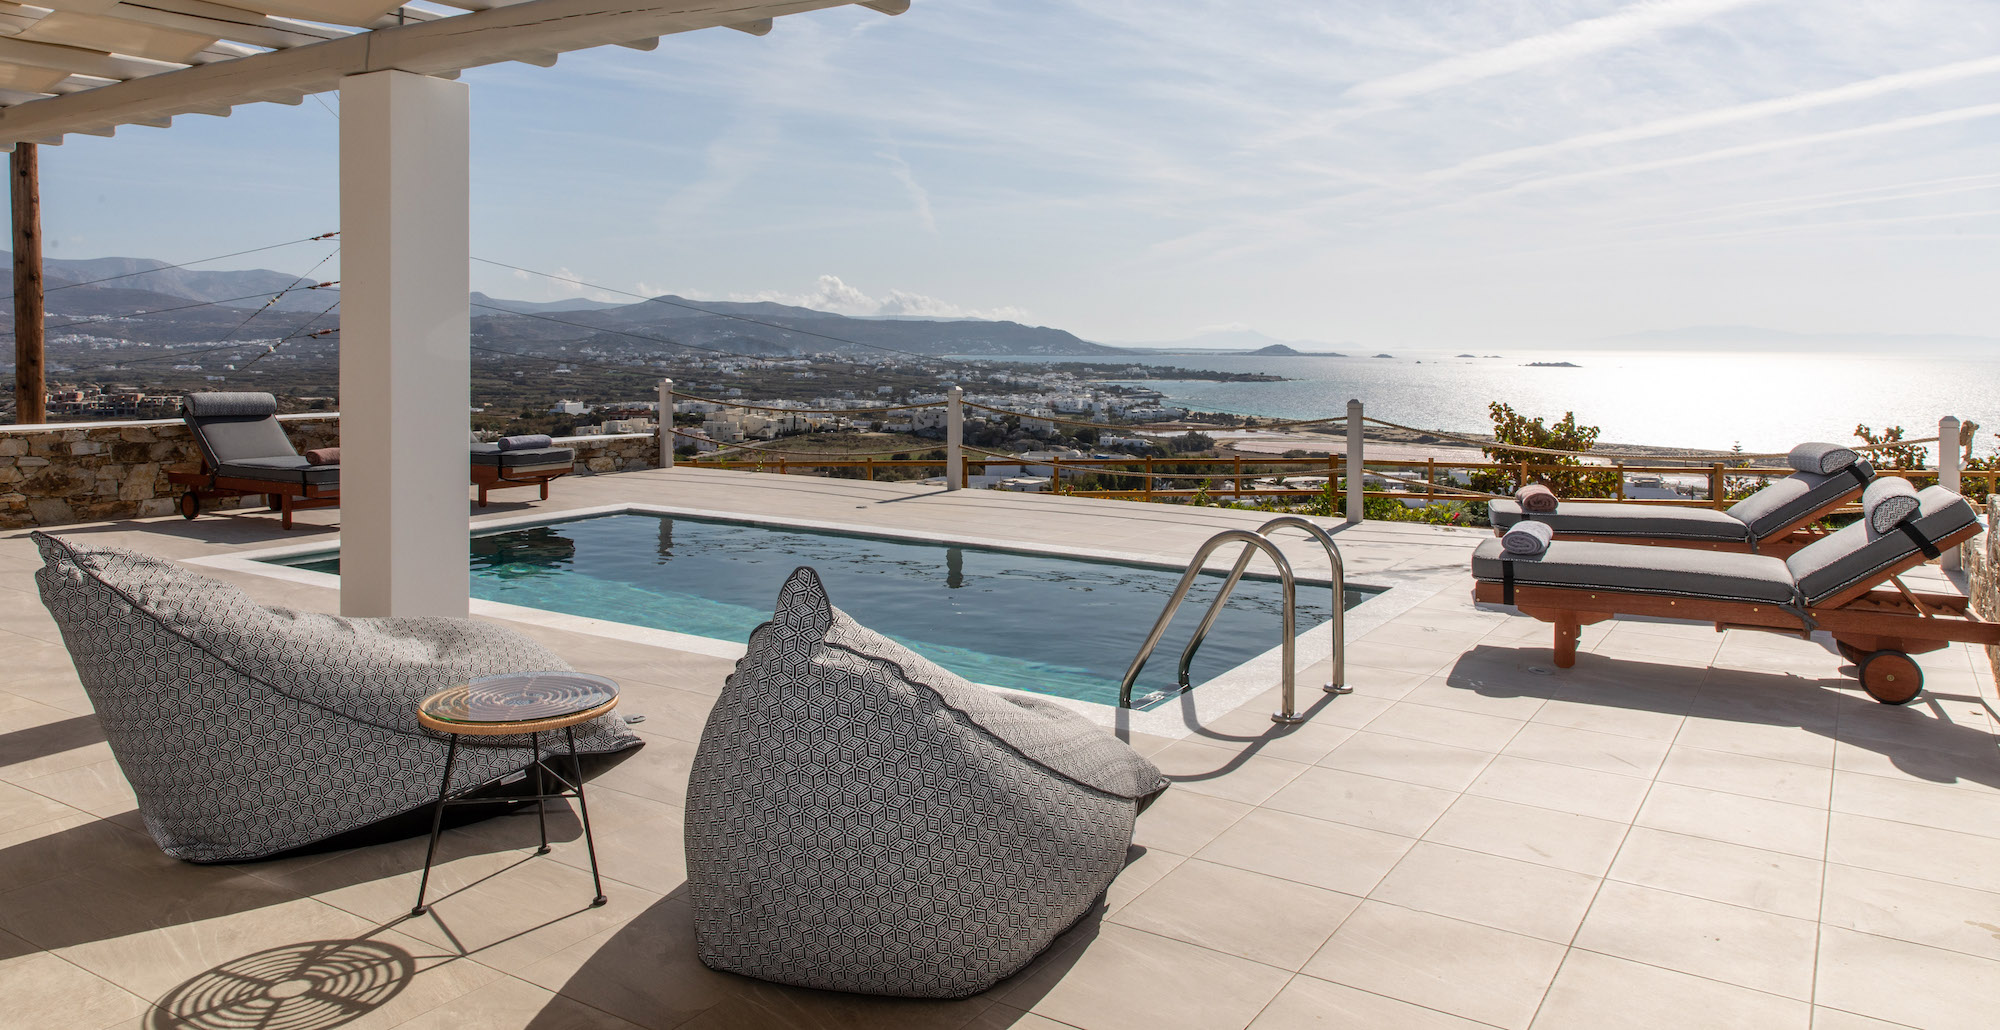 Naxos Accommodation with pool: details